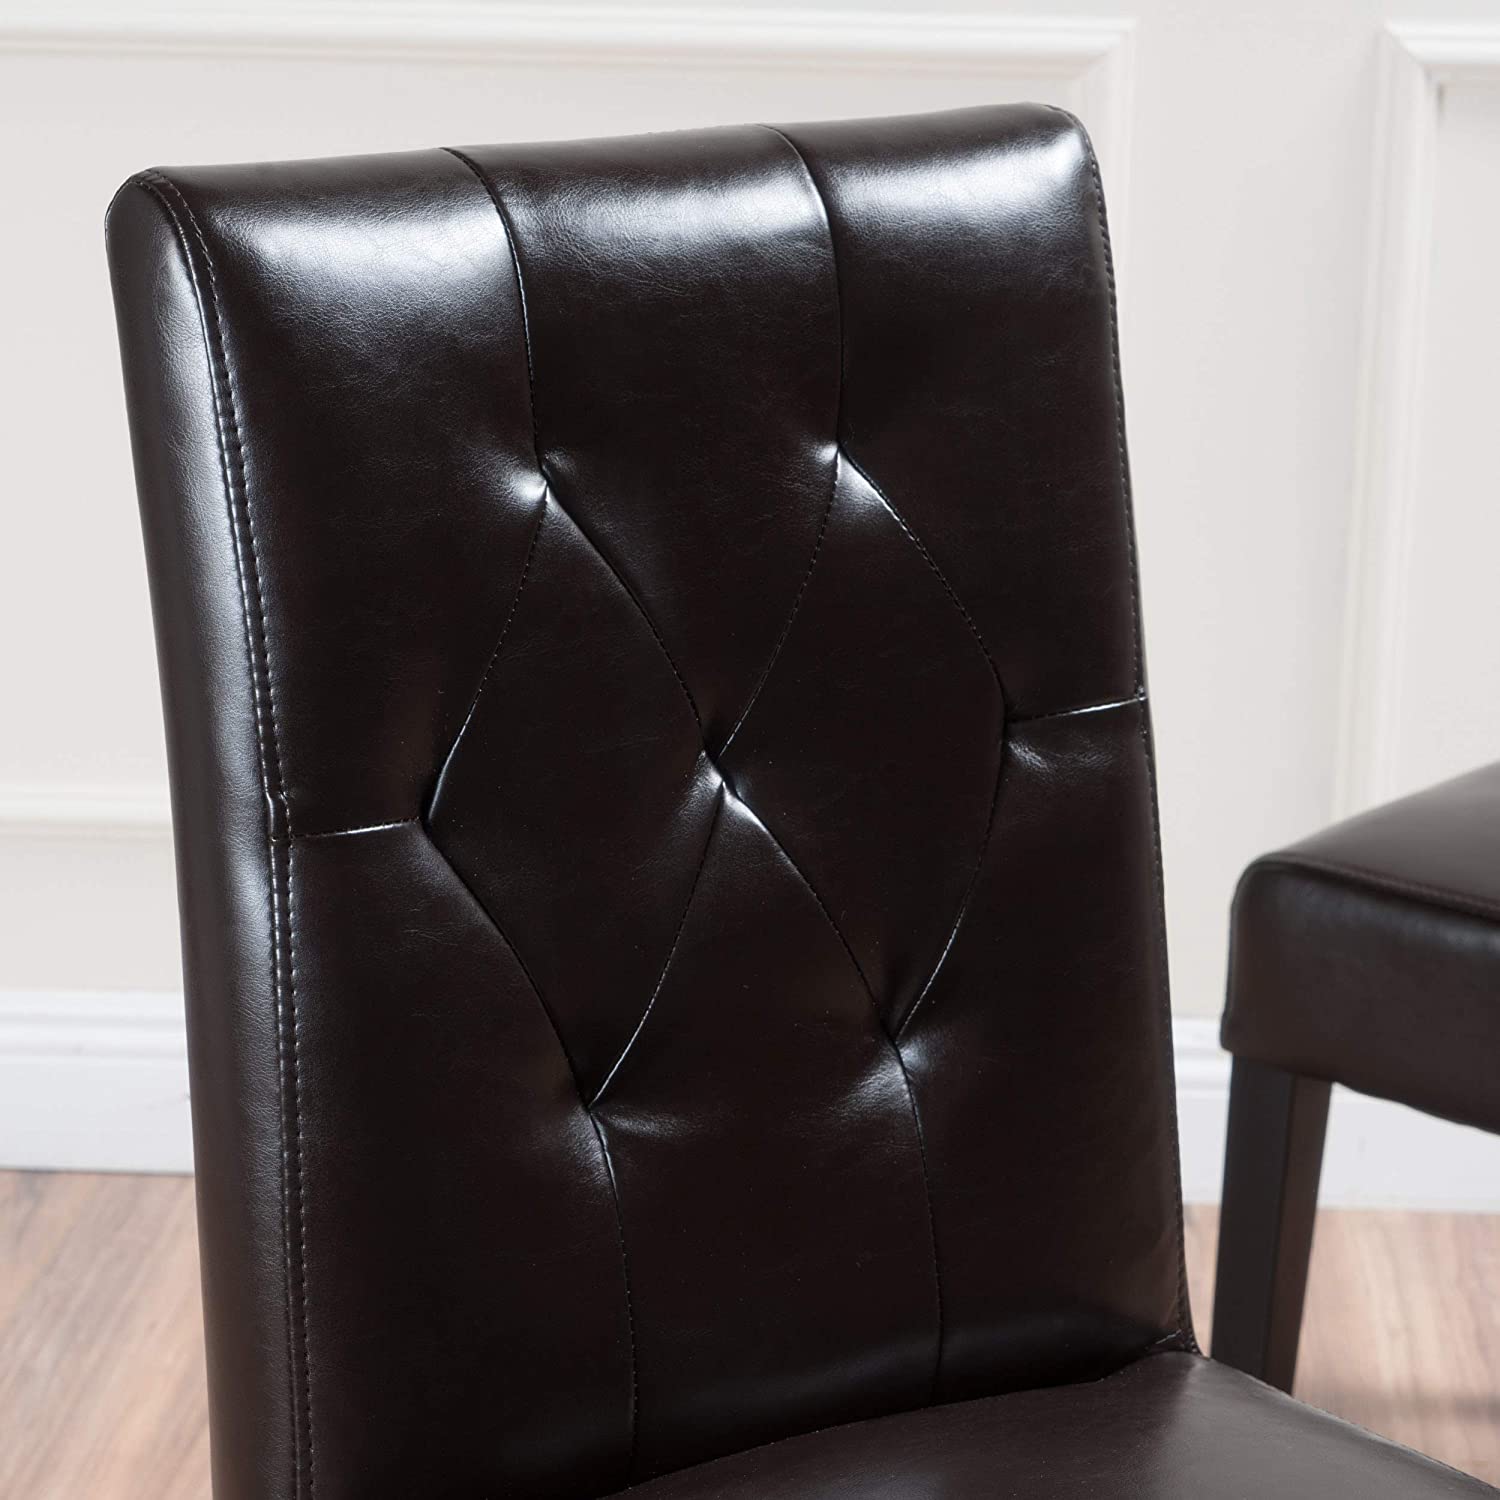 Bonded Leather Dining Chairs, 2-Pcs Set